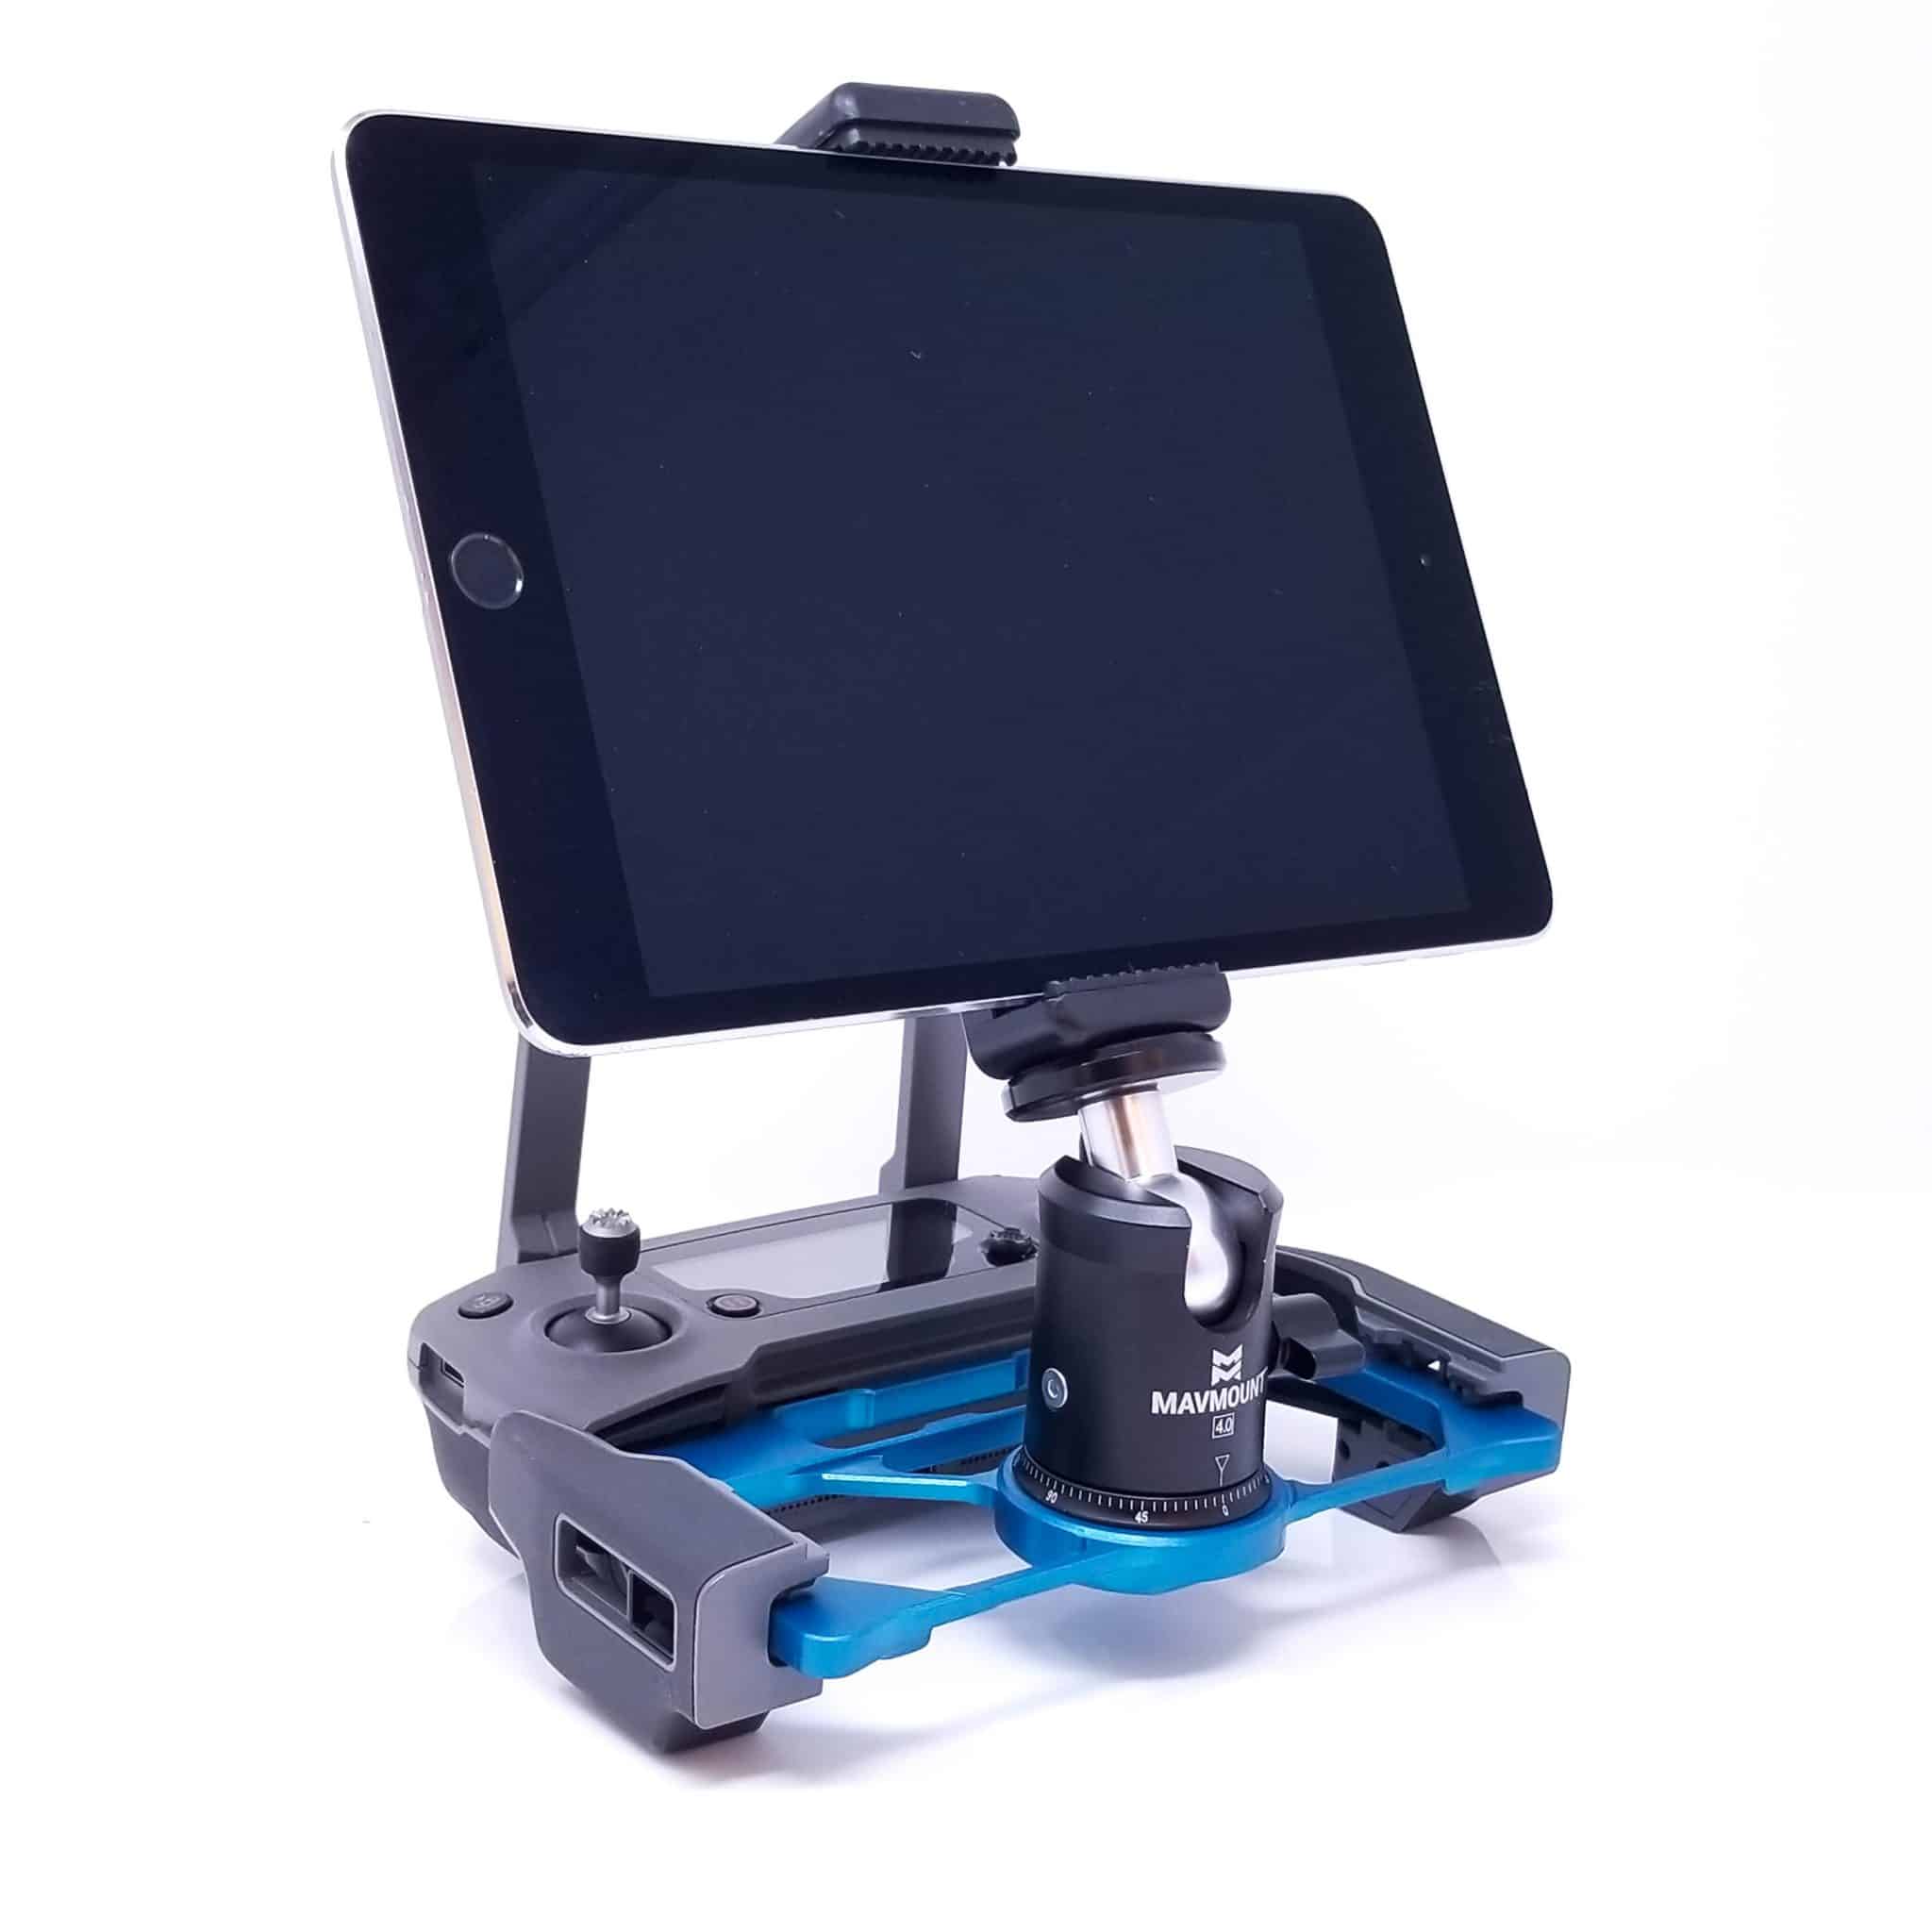 MavMount 4.0 iPad Adapter for DJI drones - Works with all Mavic series